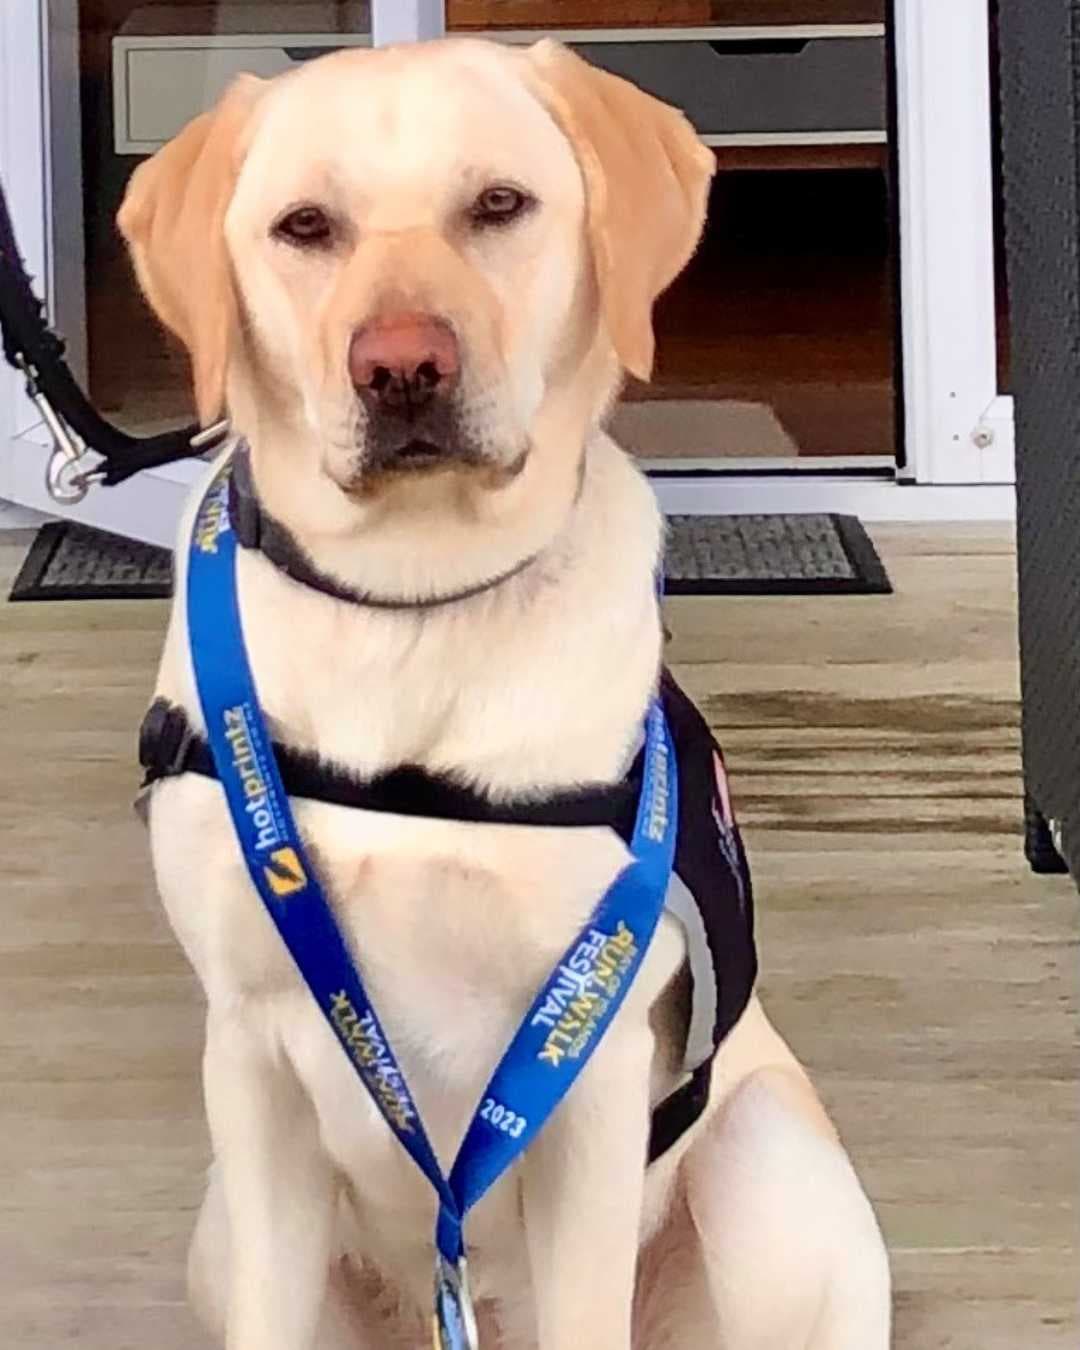 Whina, a guide dog in training sitting on a deck.